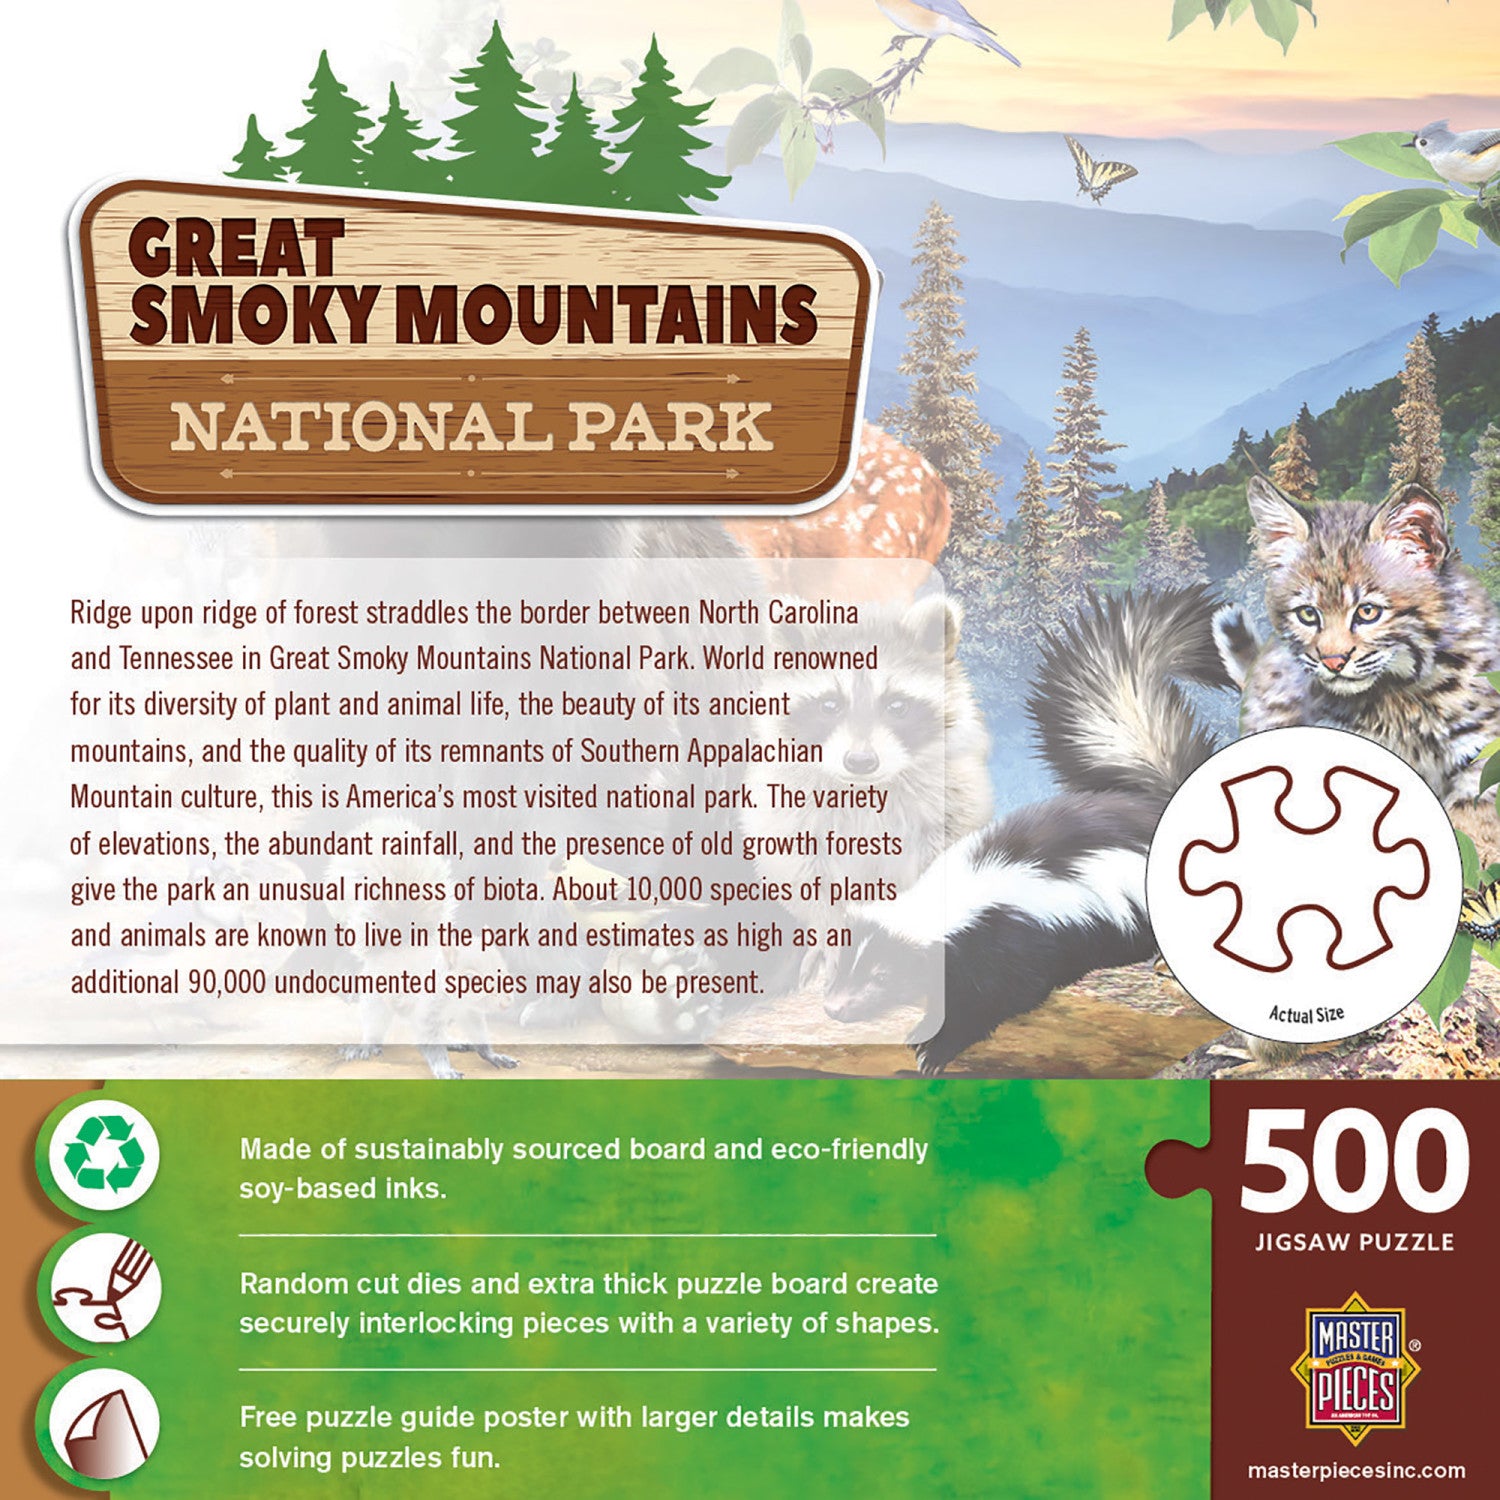 Great Smoky Mountains National Park 500 Piece Jigsaw Puzzle